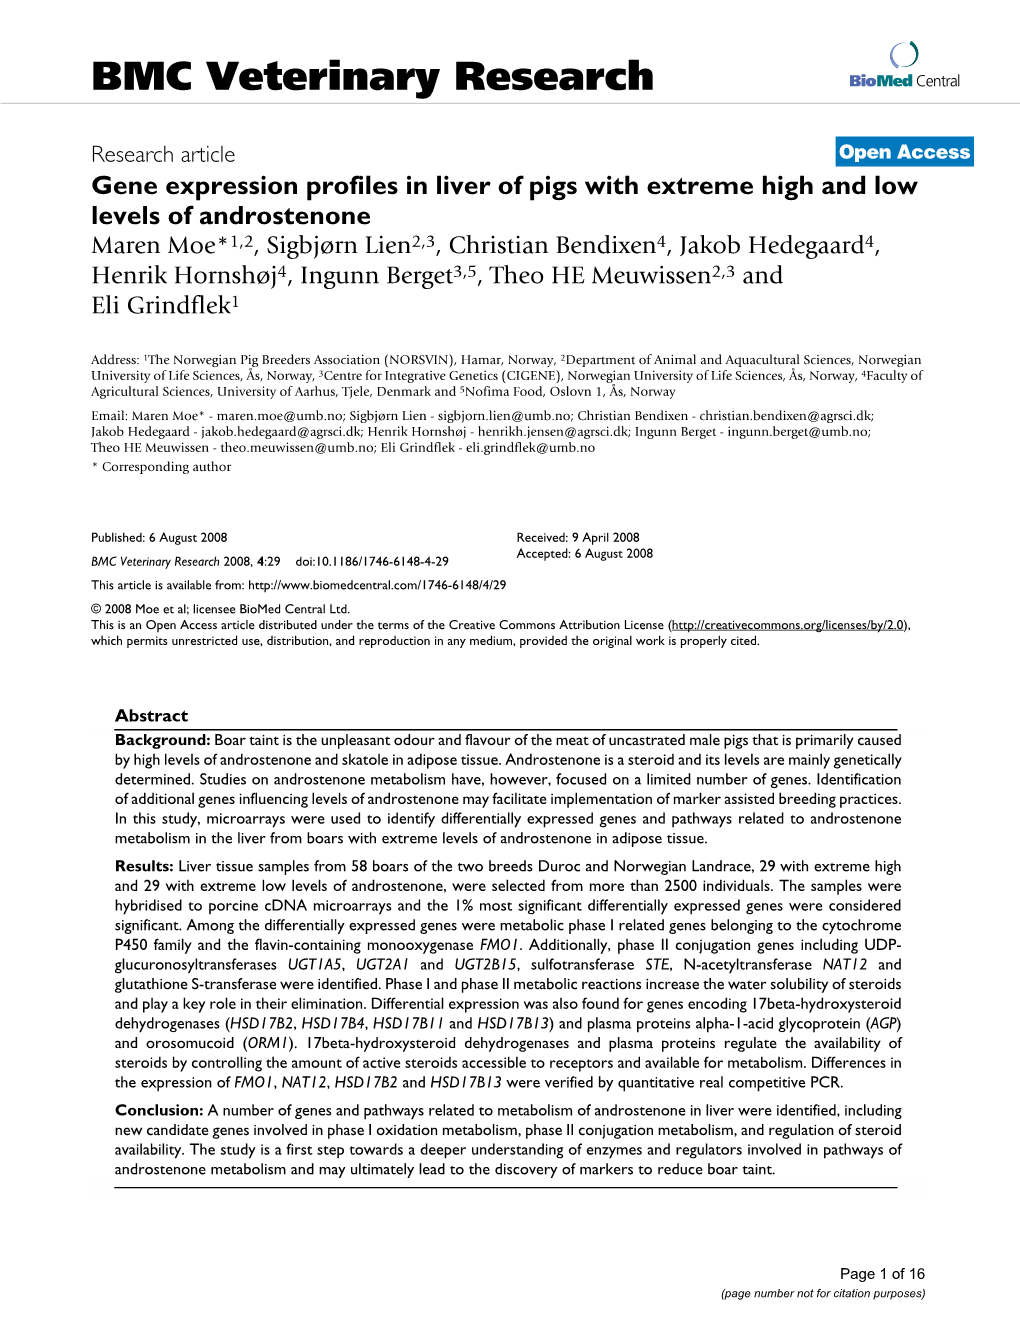 Gene Expression Profiles in Liver of Pigs with Extreme High and Low